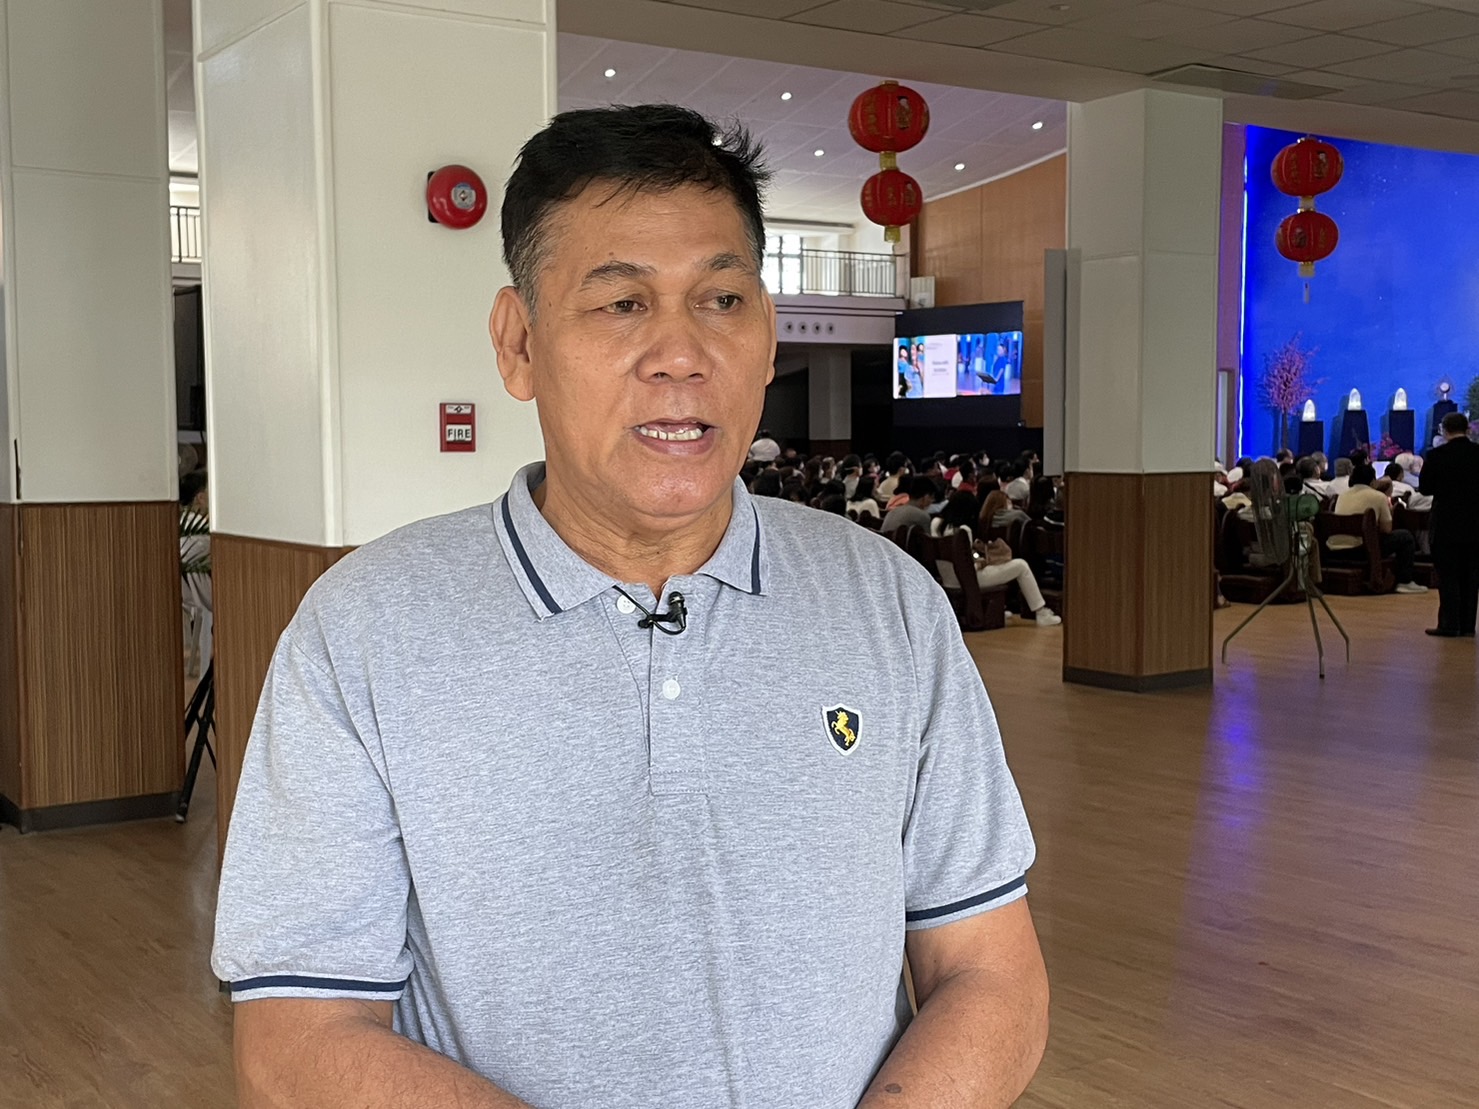 Through Tzu Chi’s influence, jeepney driver Jimmy Catabay finds fulfilment in helping others. “We once needed help, now we can help others. It’s give-and-take,” he says.